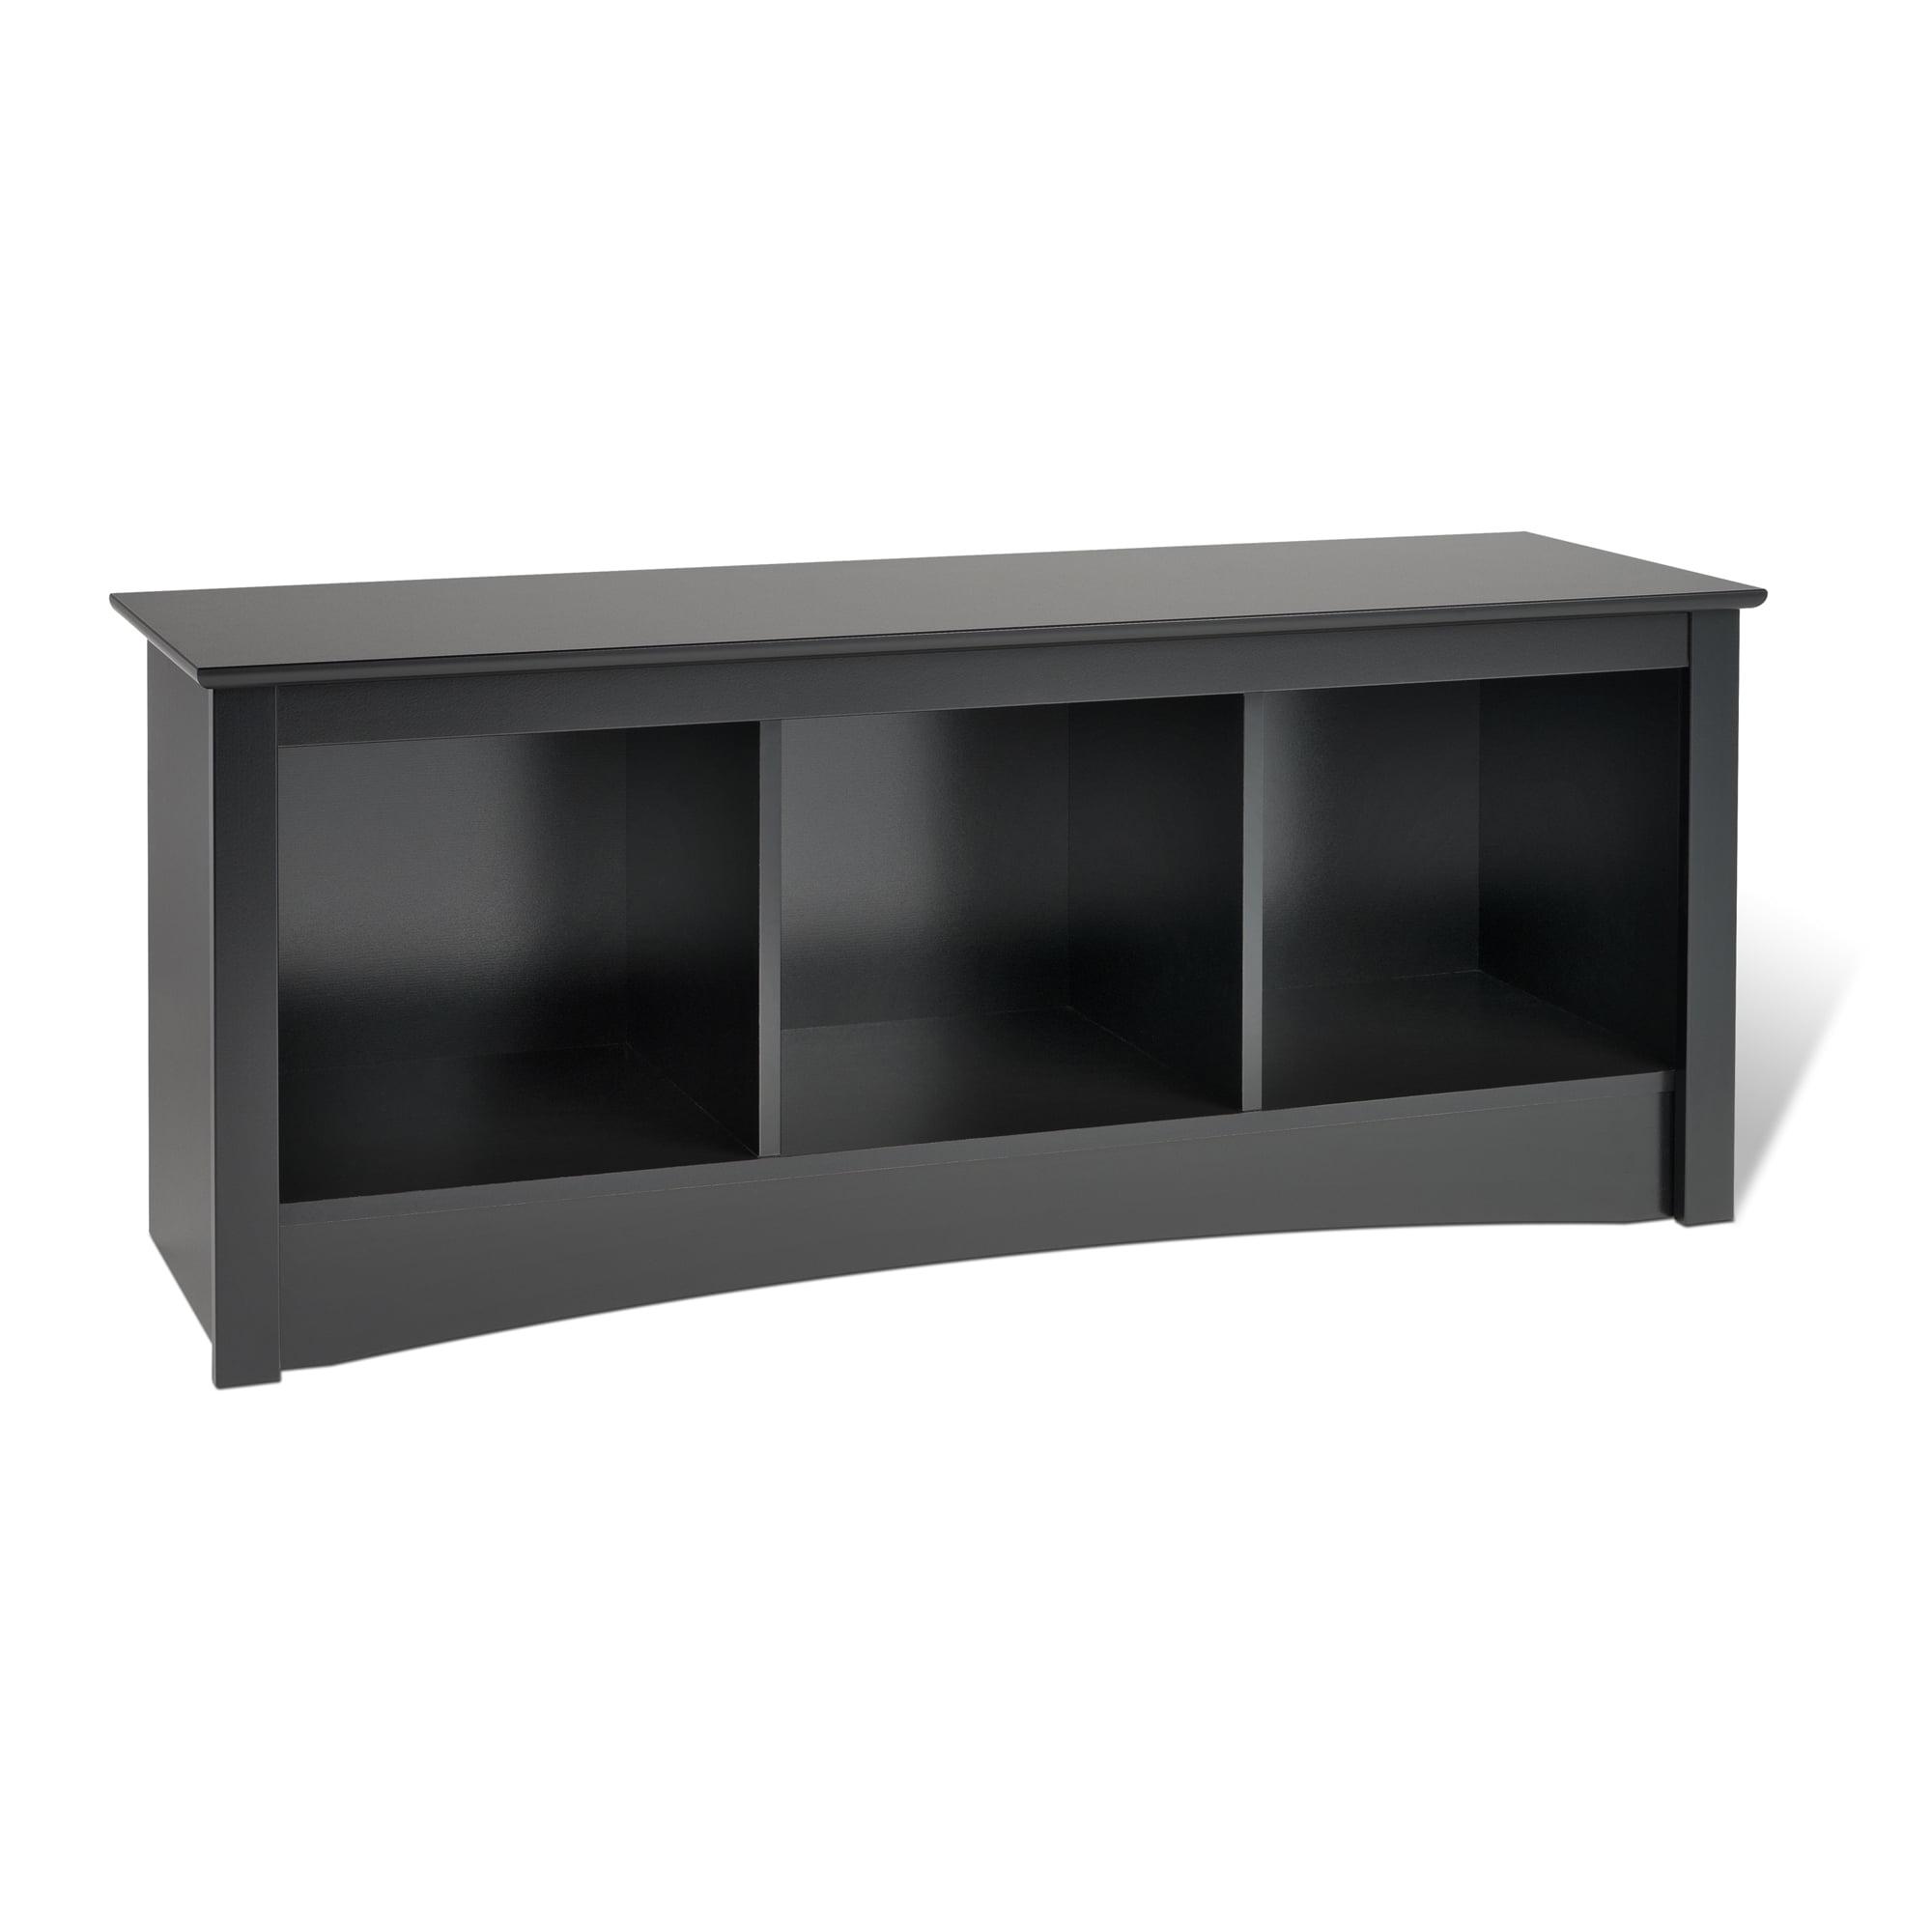 Sonoma Black Laminate 54" Storage Bench with 3 Compartments